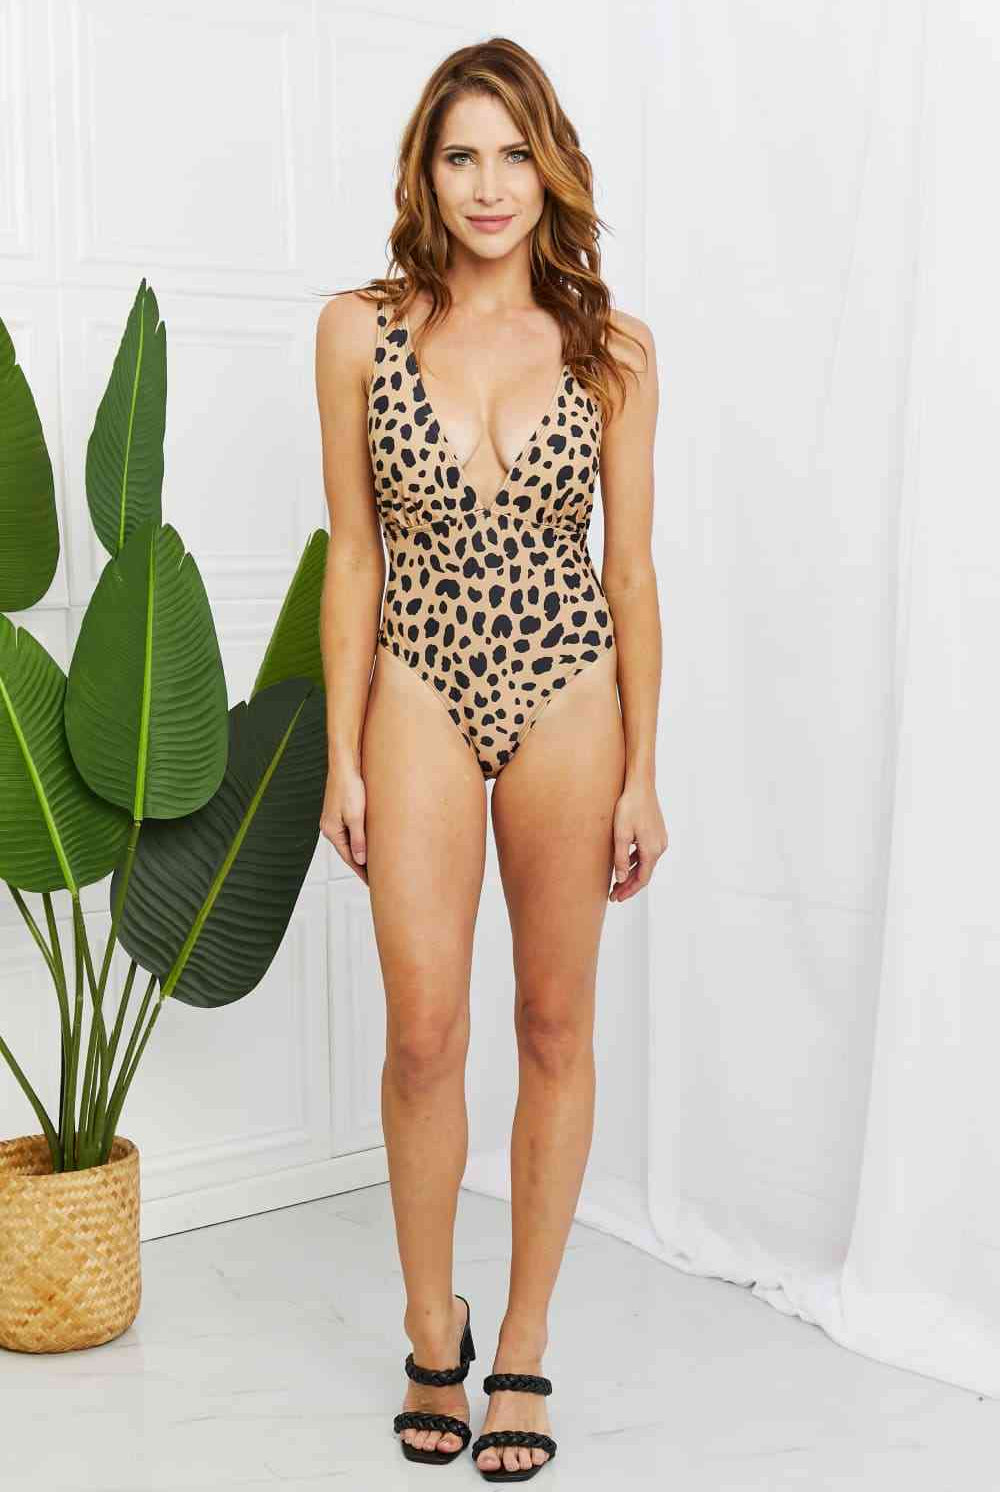 Light Gray Marina West Swim Beachy Keen Full Size V-Neck Front Tie One-Piece Swimsuit in Leopard Trends